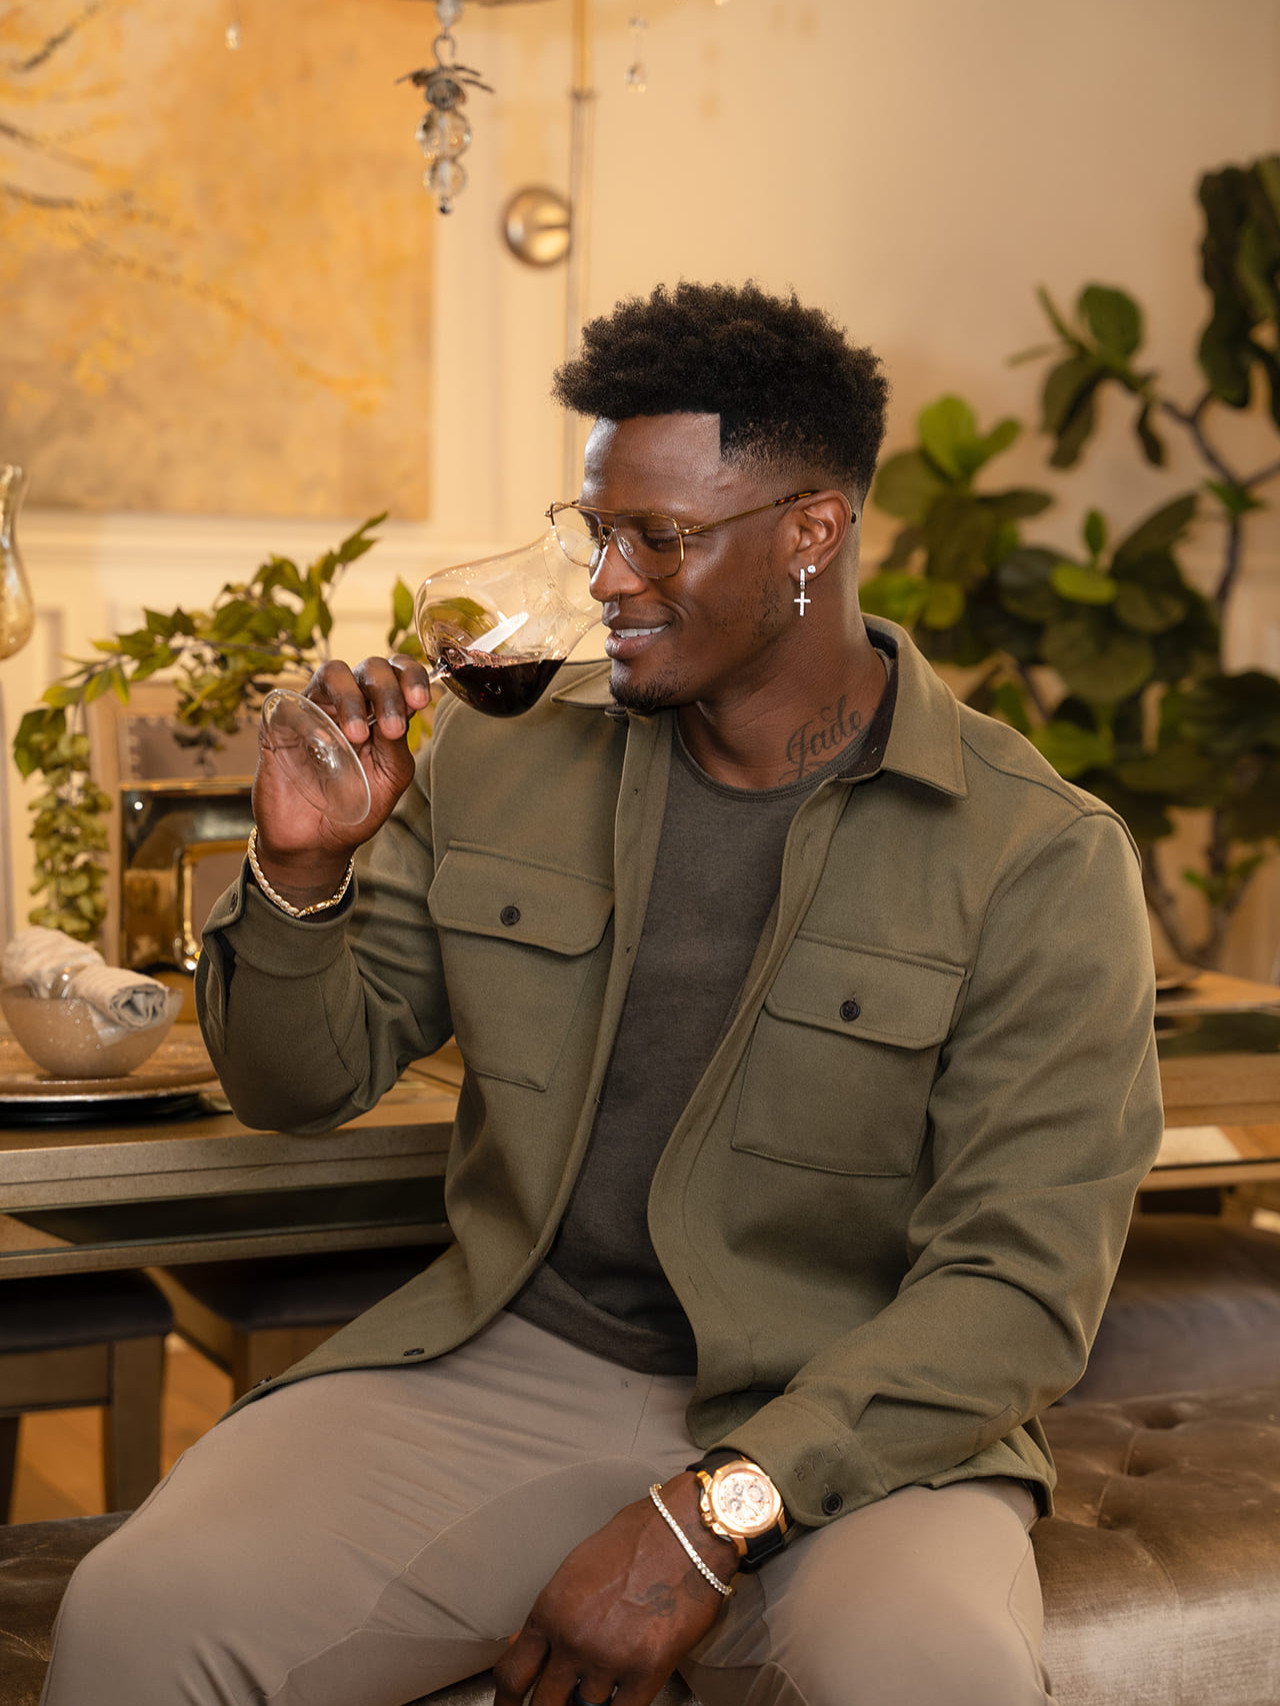 Talk with Will Blackmon - NFL Wine Guy - United States